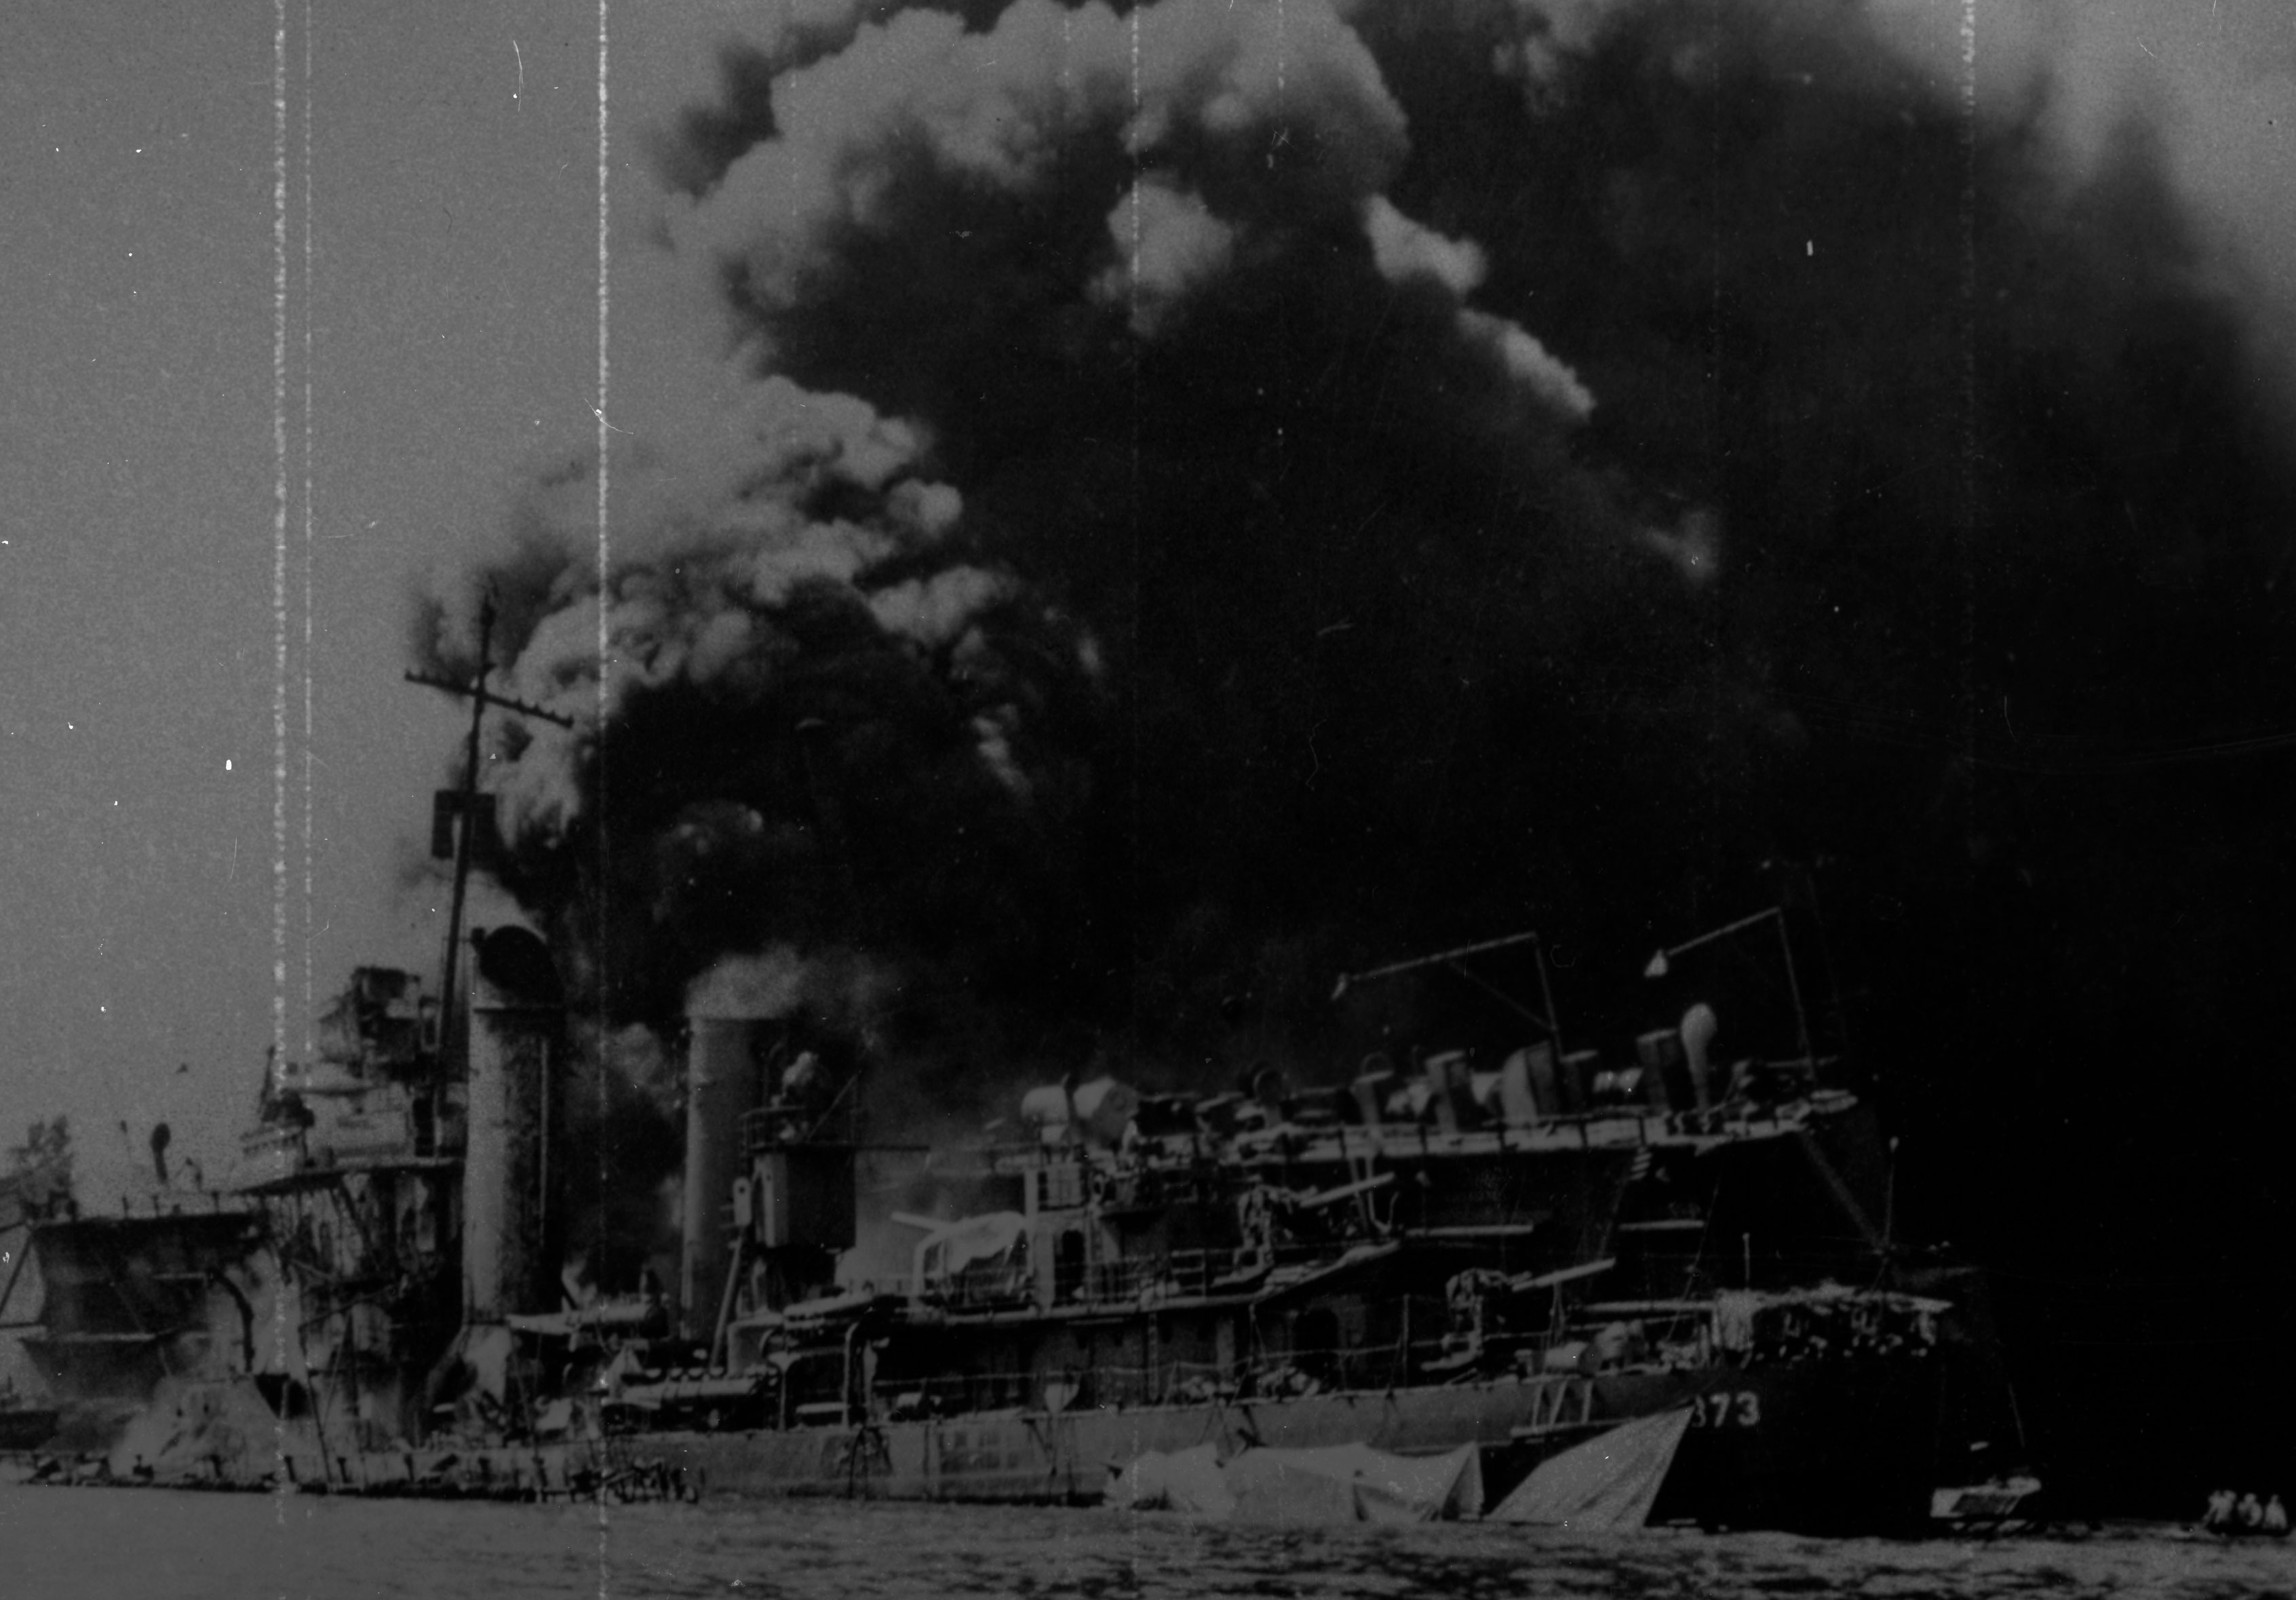 USS Shaw sinks during Pearl Harbor attack